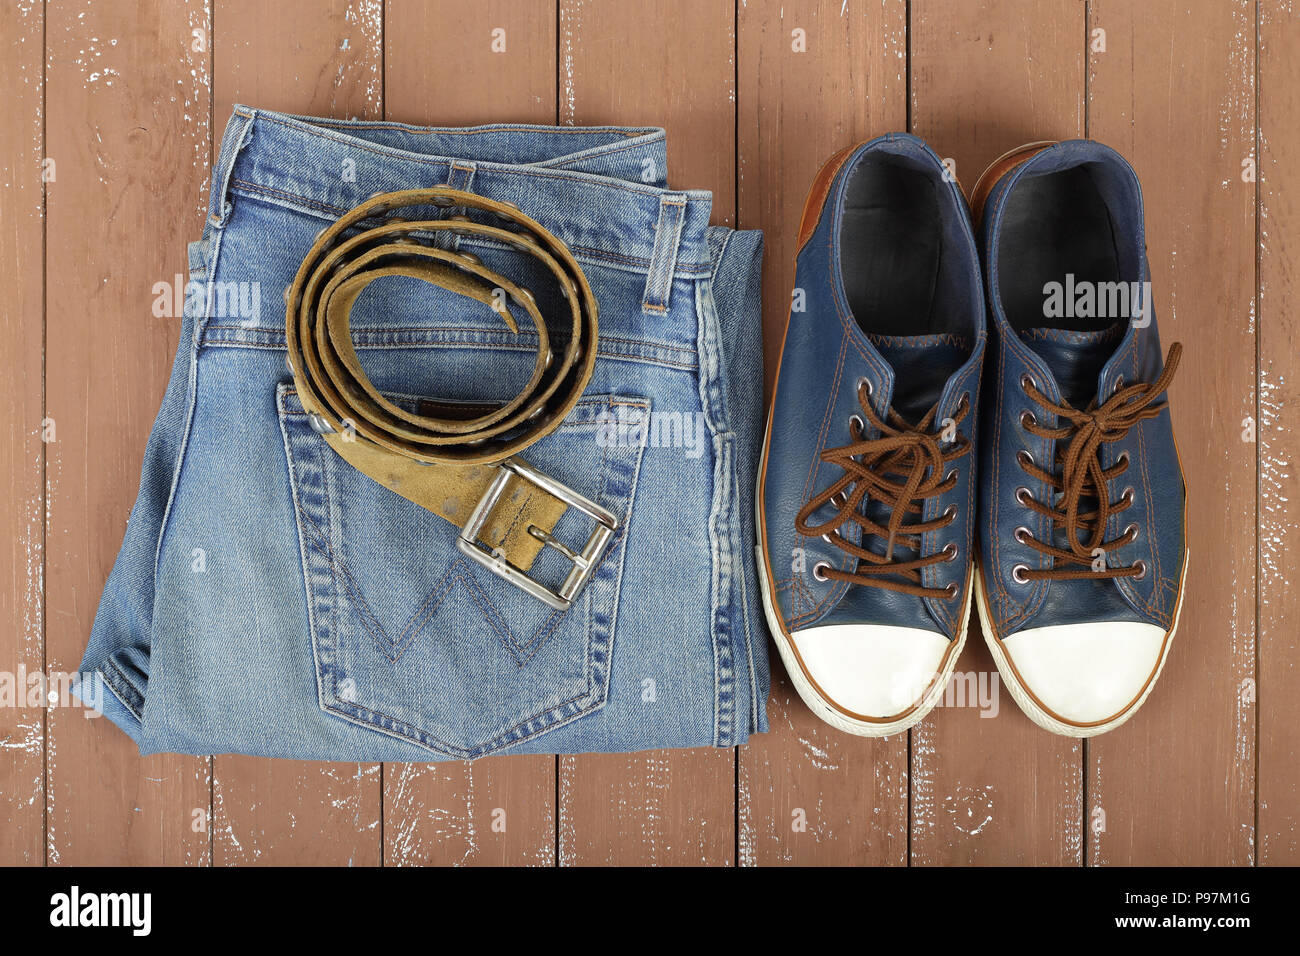 Clothes, shoes and accessories - Top view leather belt, gumshoes and blue jeans on a wooden background Stock Photo